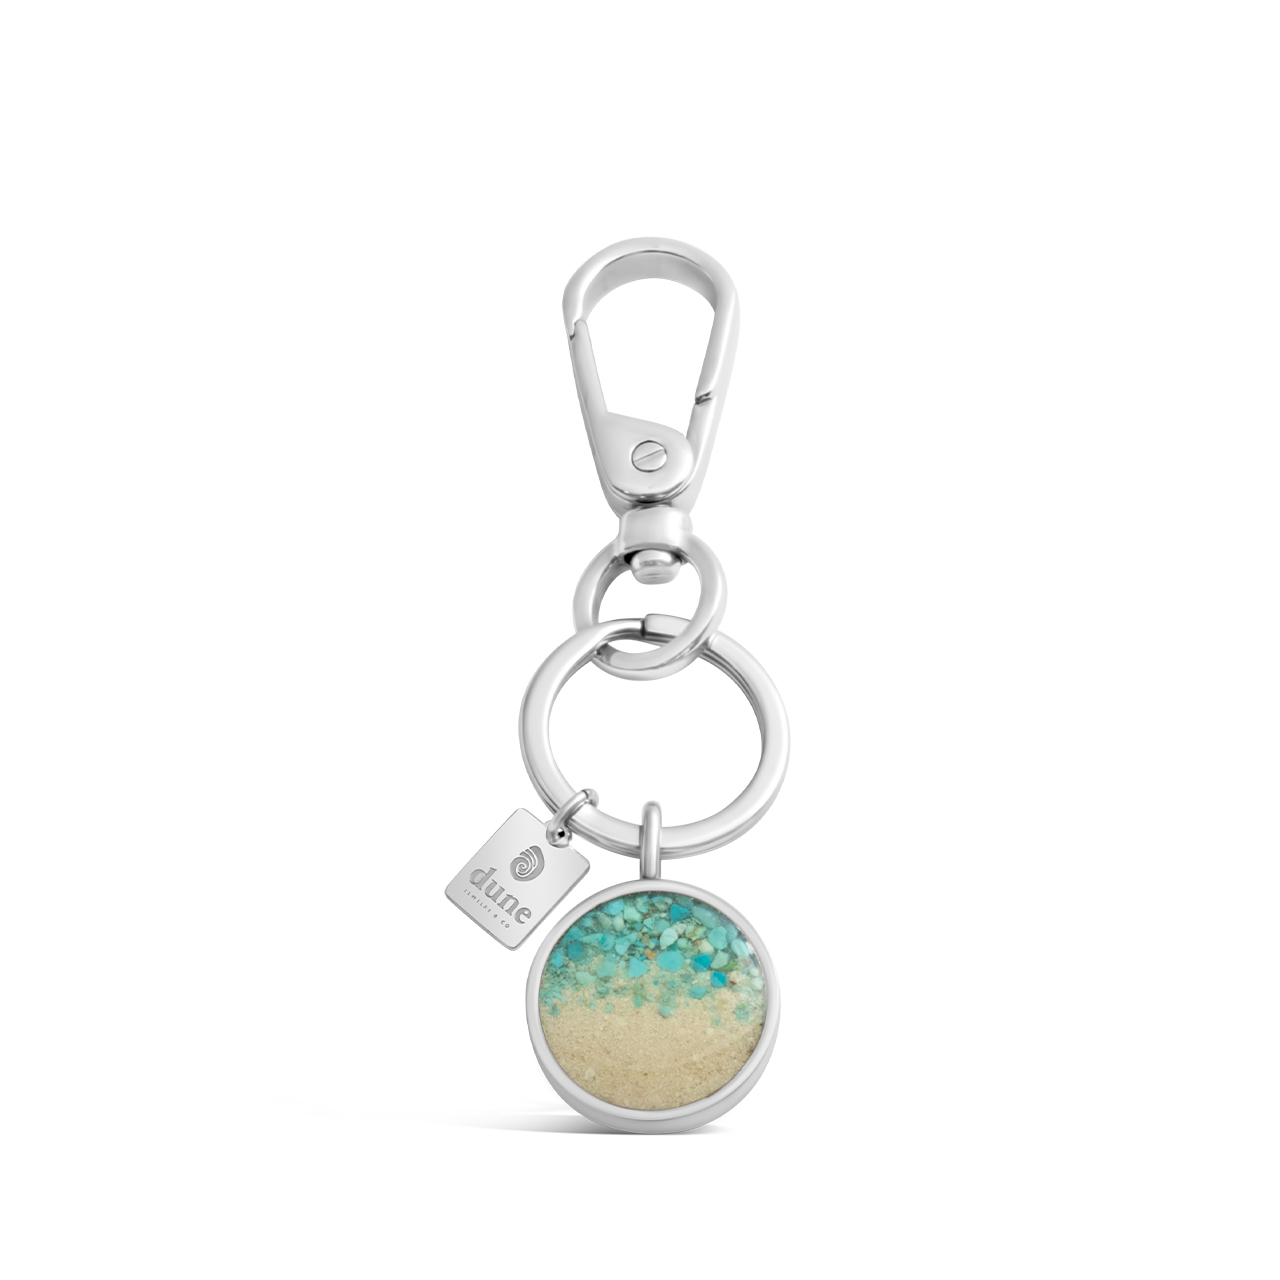 Keychain and Bag Charm - Round - Turquoise Gradient